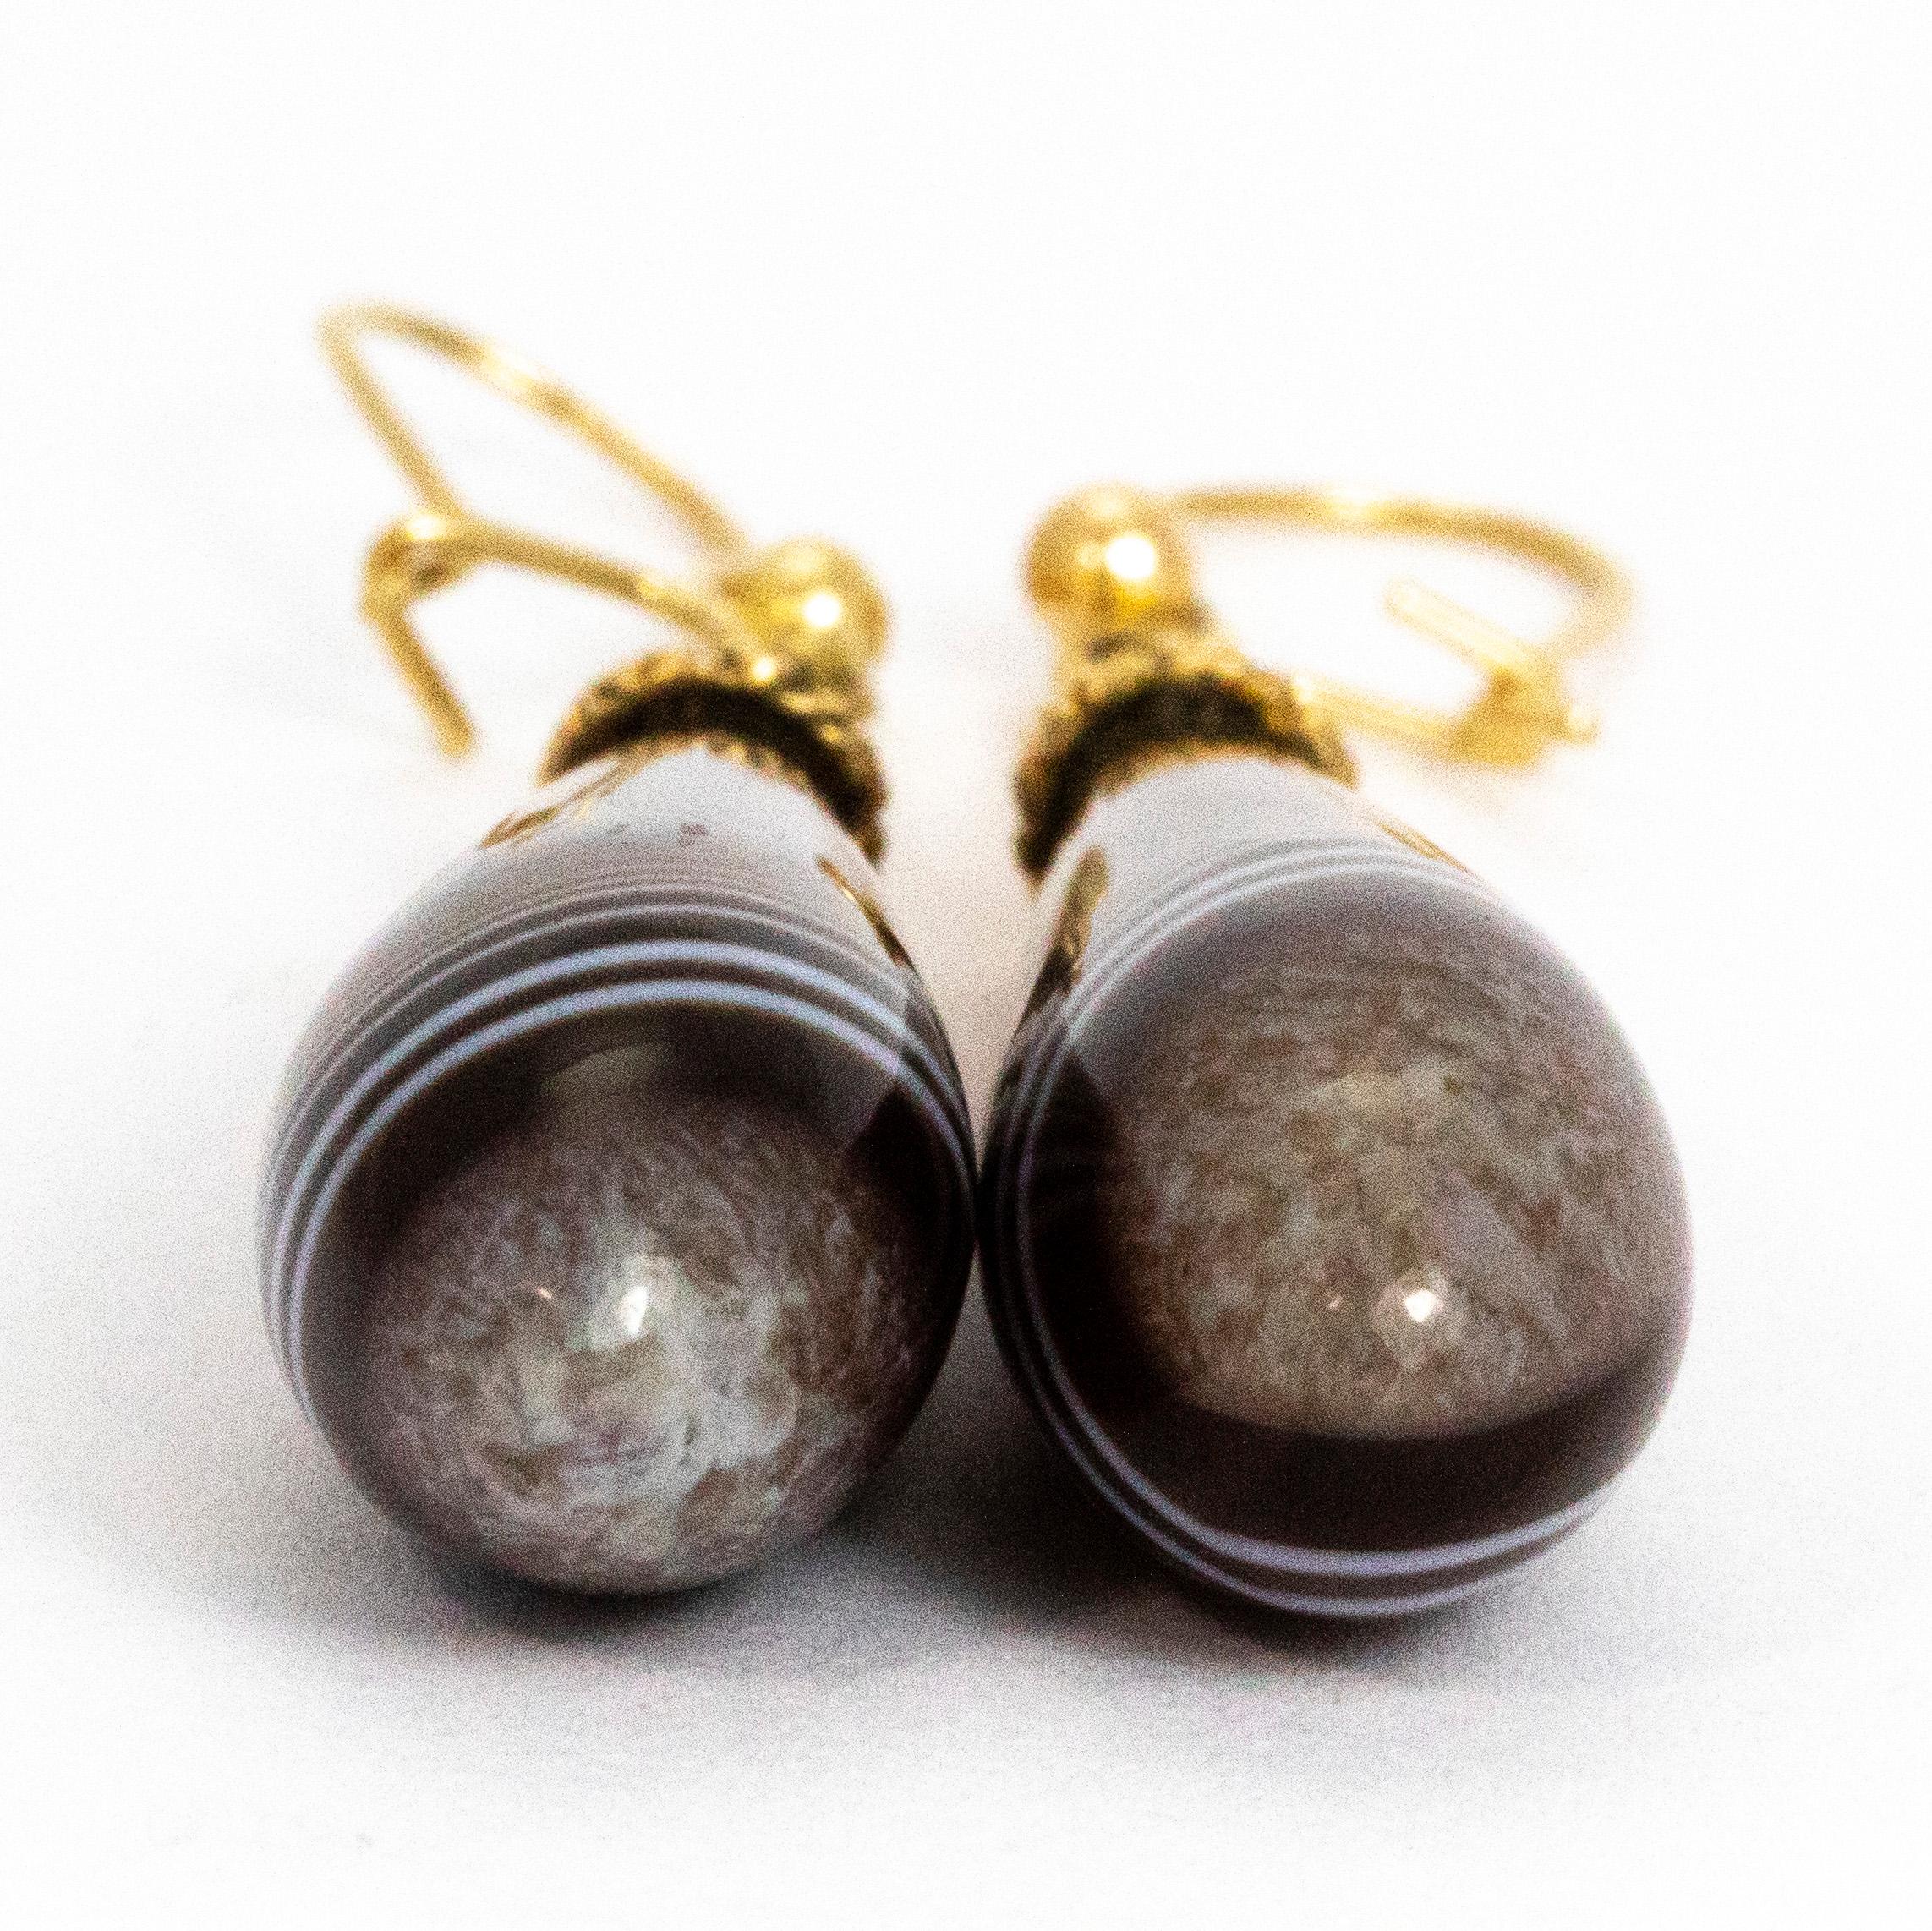 These gorgeous banded agate stones are shaped into tear drops and have a gorgeous gloss on them. The colours running through the stone are all different shades of brown and have bright white bands which cut through the different tones. The earrings